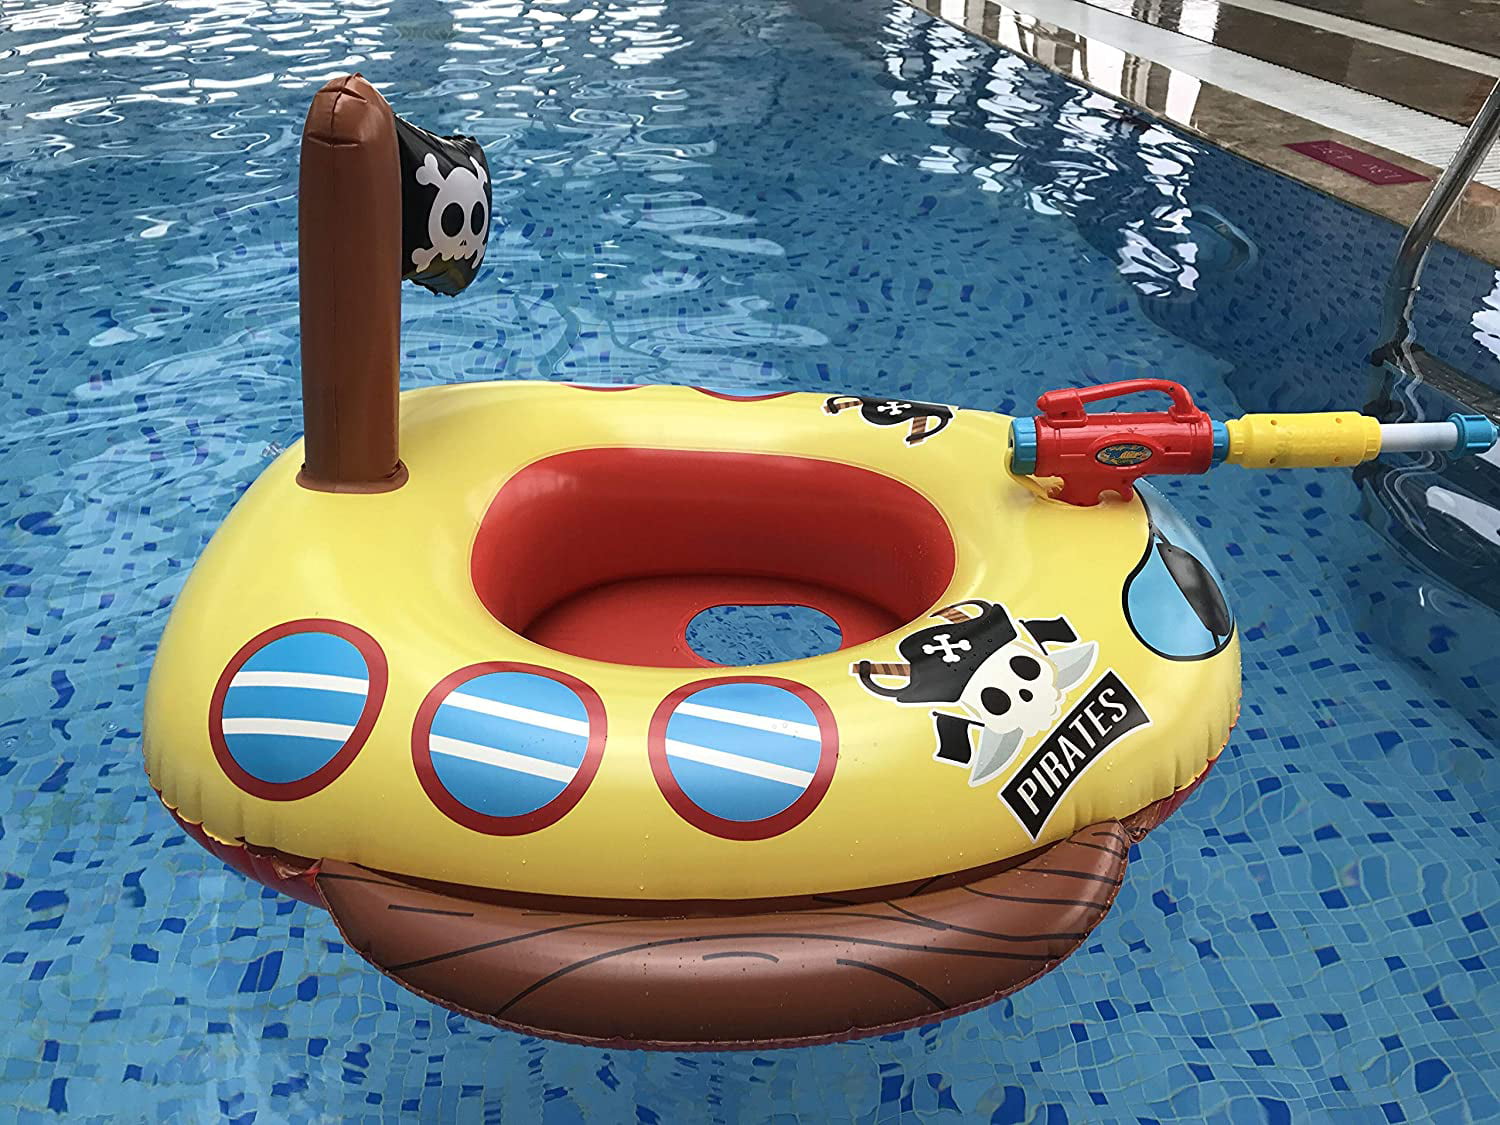 Pirate Ship and Fire Truck Design Big Summer Inflatable Ride-on Pool Float for Kids with Built-in Squirt Gun 